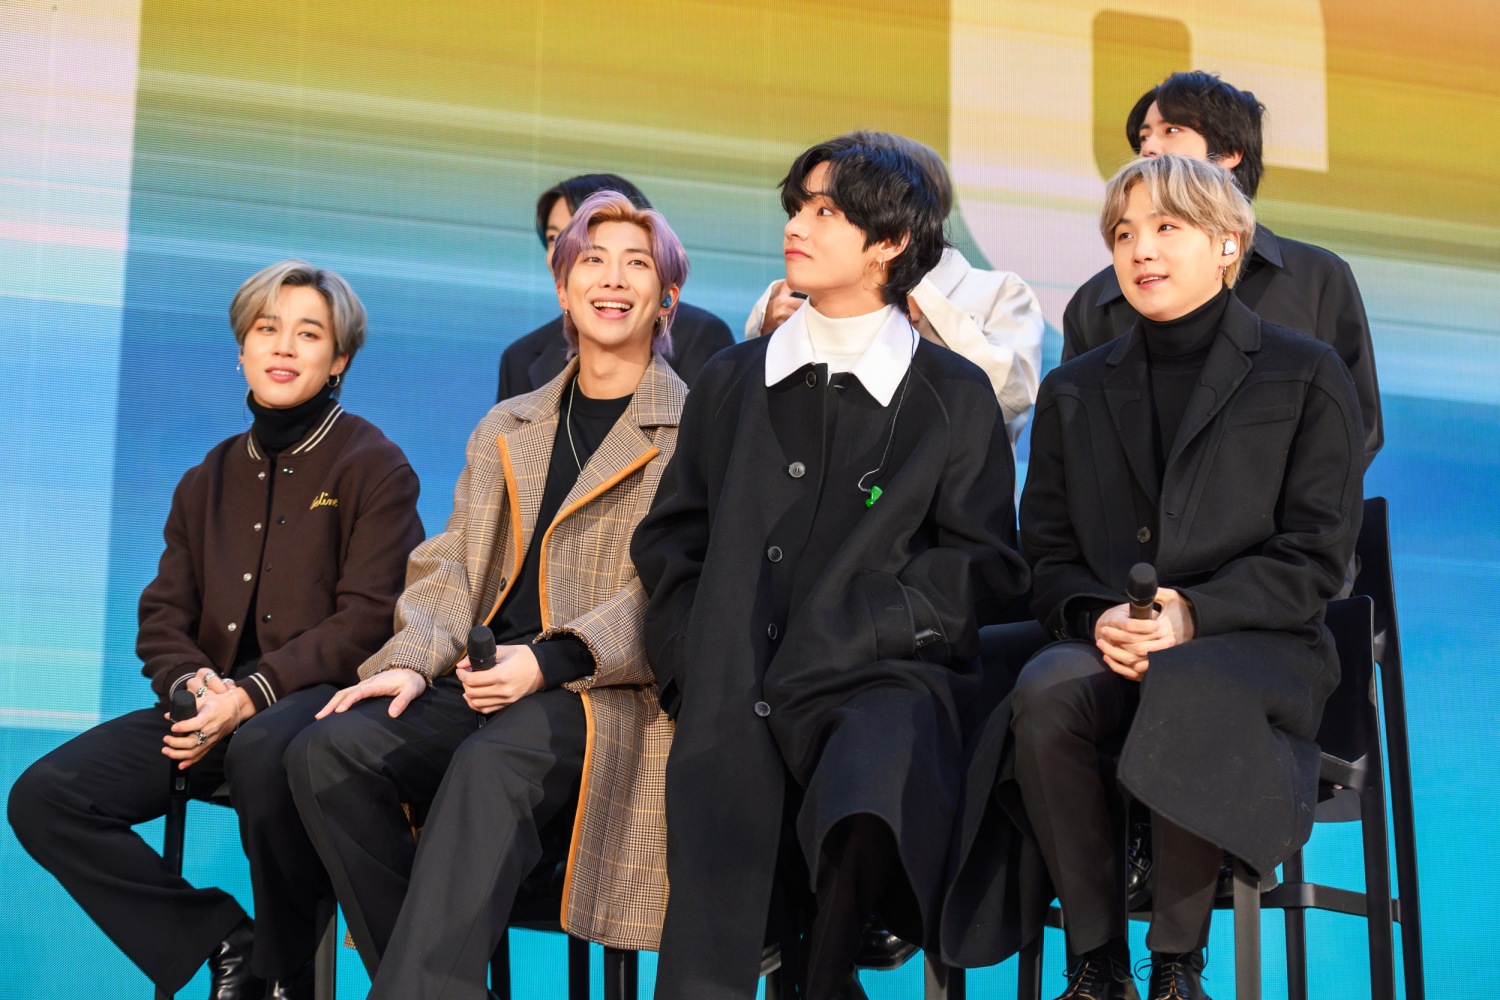 There's no time left for growth': why BTS have paused their career